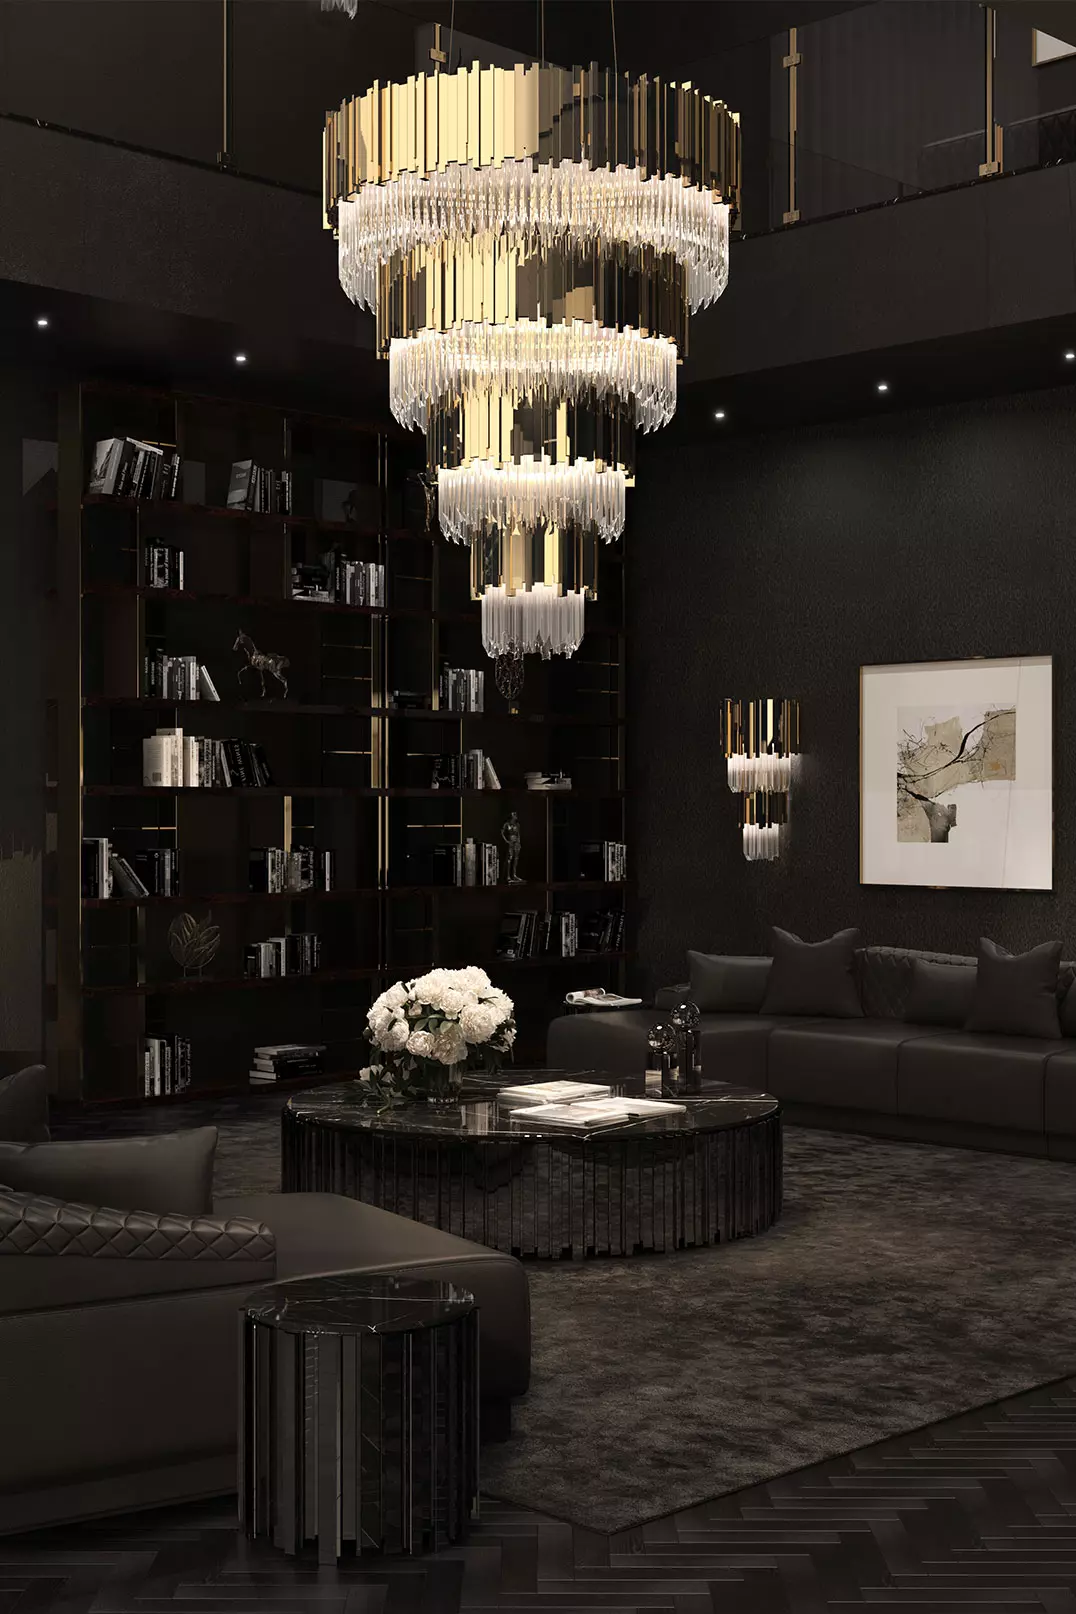 Stylish Living Rooms With Ultimate Luxury